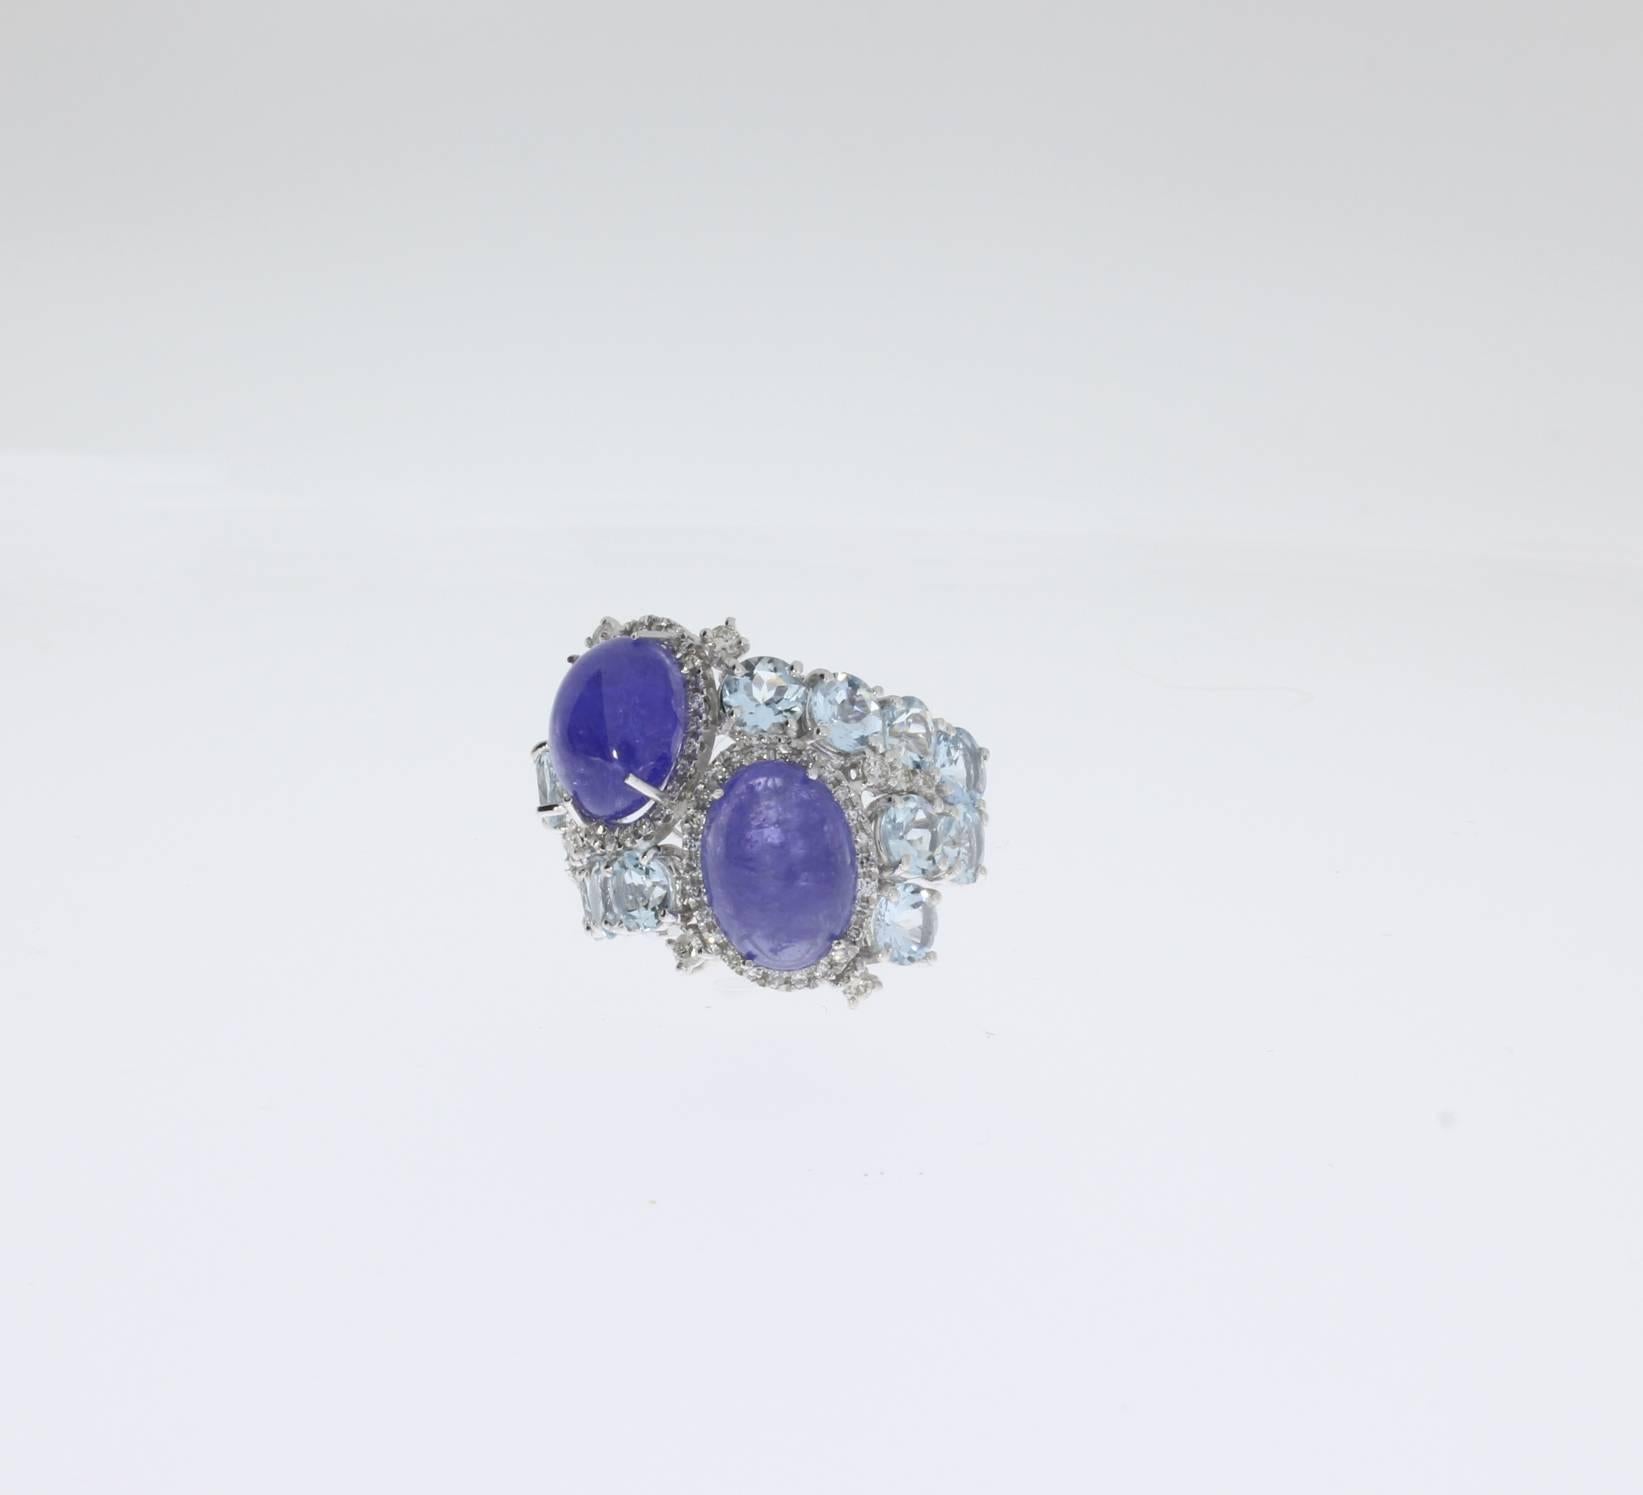 Italian fancifully design with two cabochon-cut sapphire weighing more than 8 carats. Flanked by 14 aquamarine weighing ca. 5,20ct. and 62 brilliant-cut diamonds weighing approximately 0,64ct. Mounted in 18K white gold. Total weight: 14,02 g.